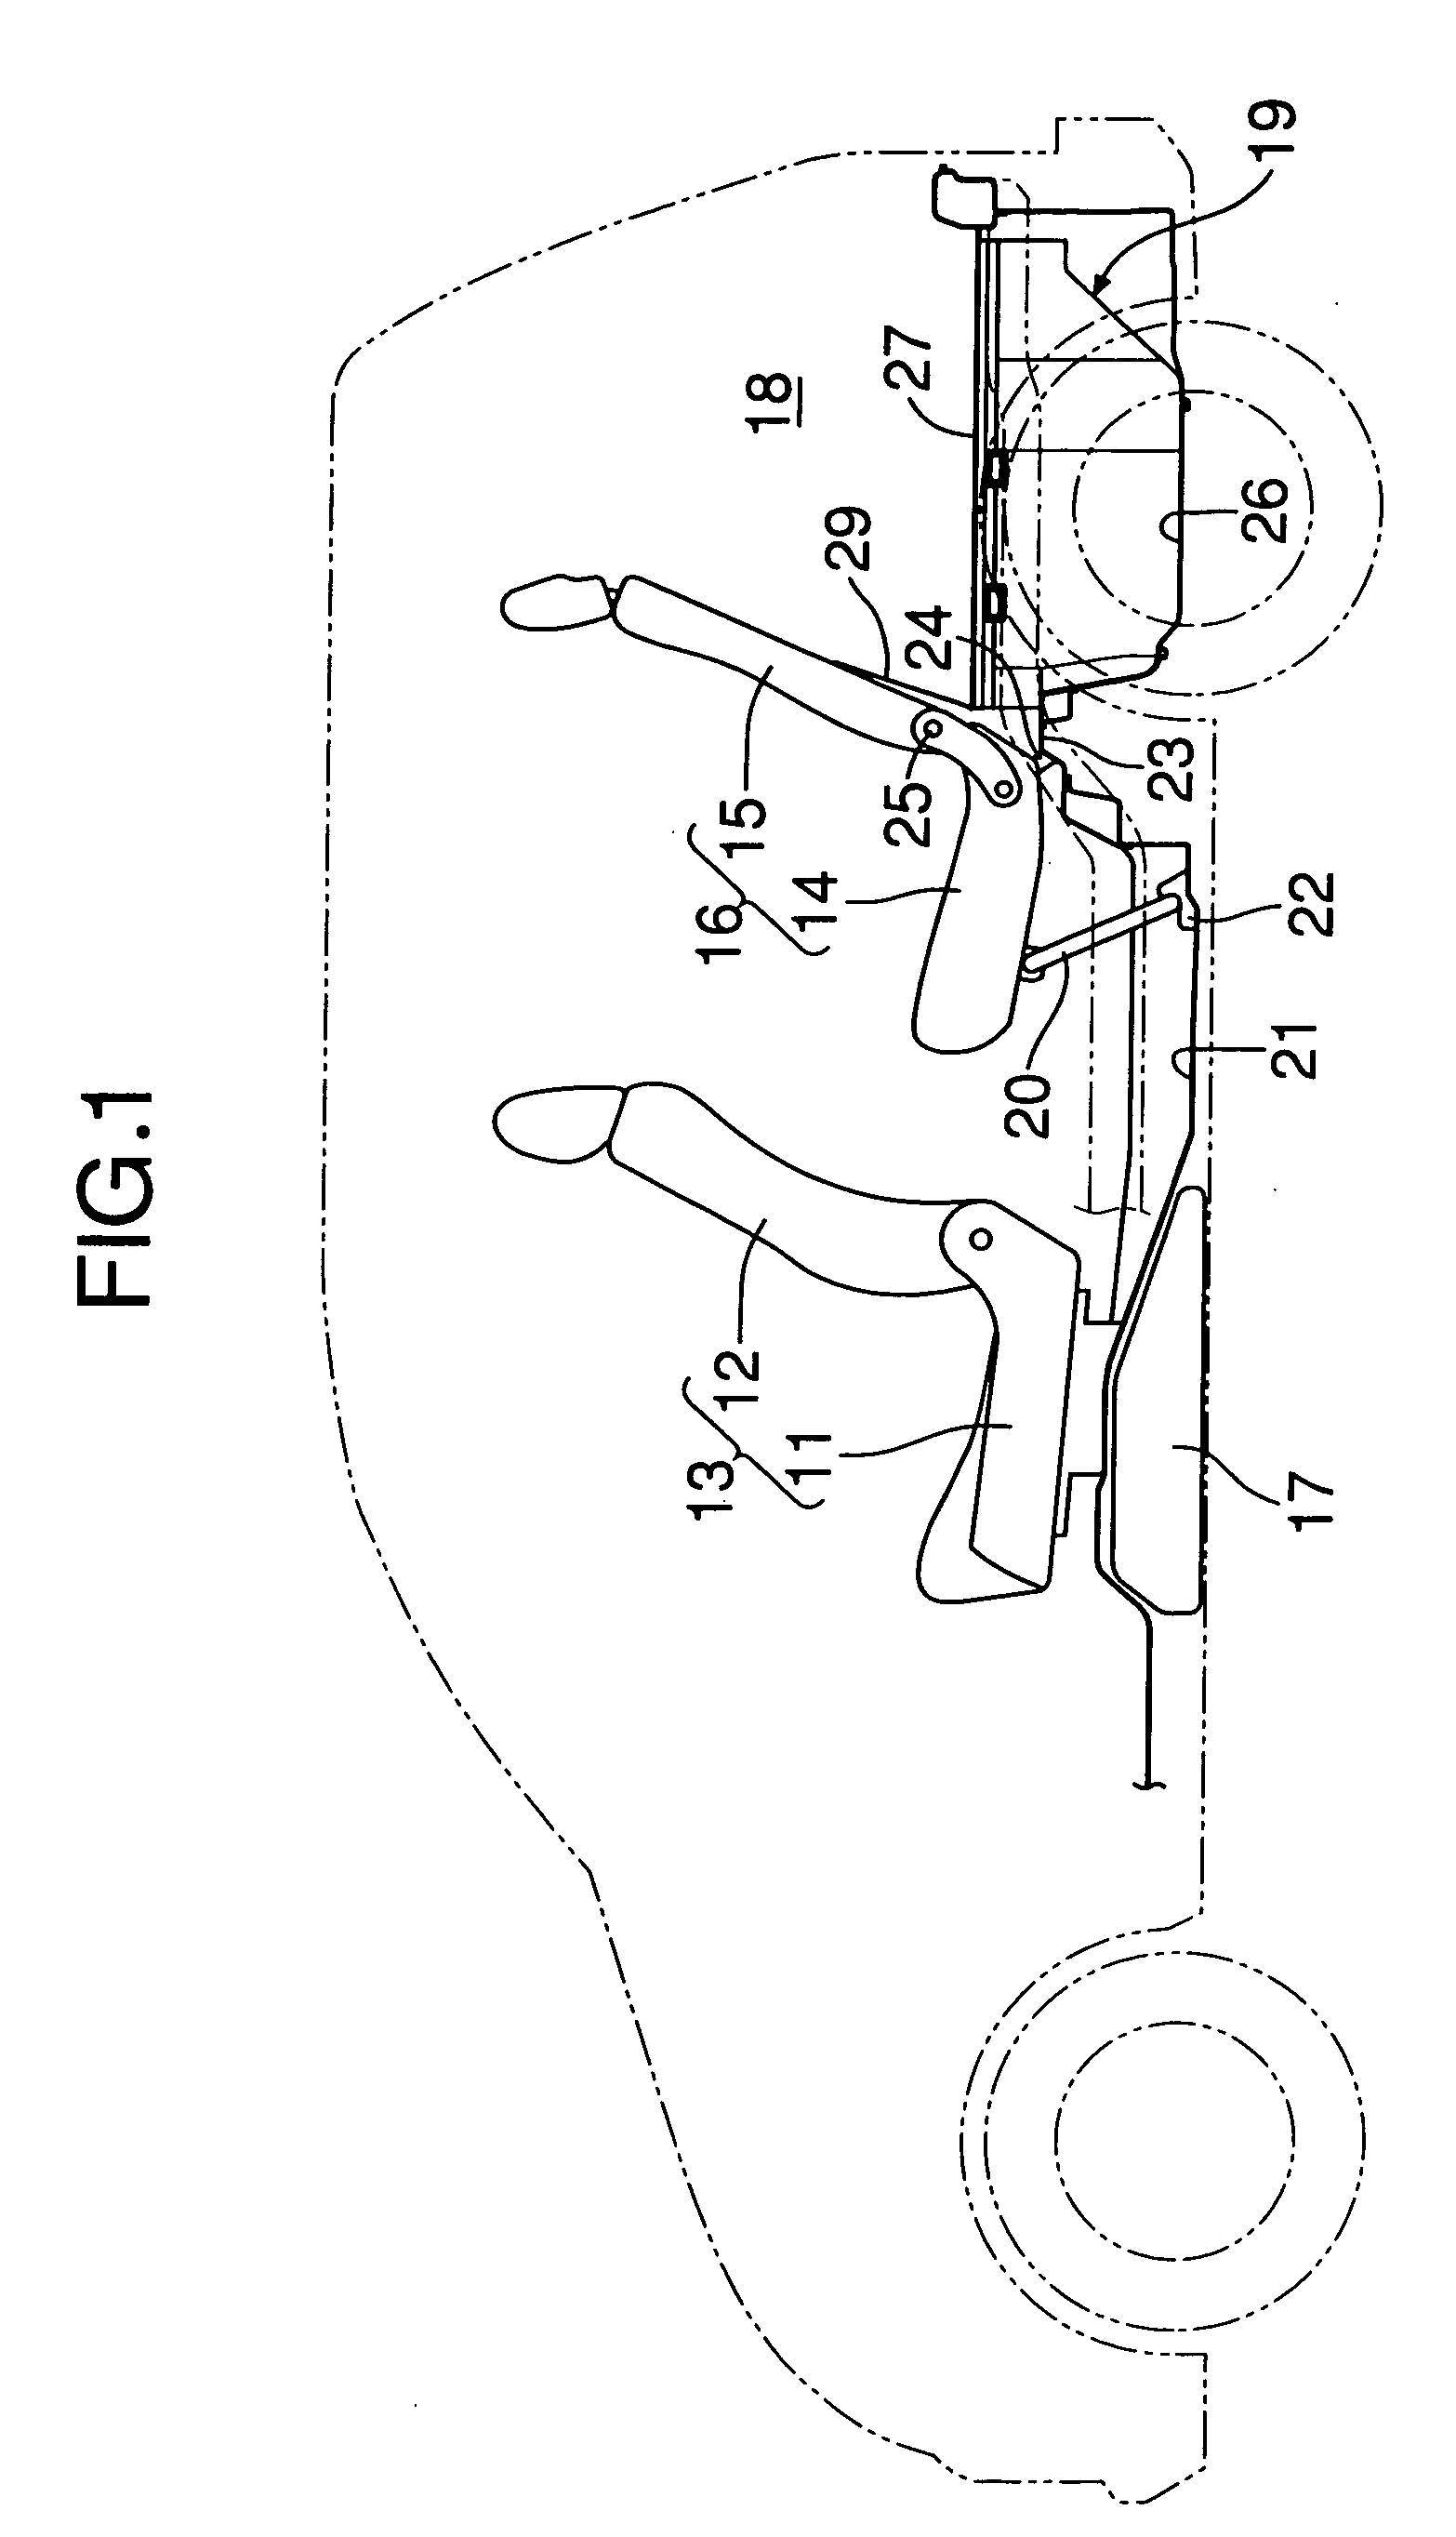 Electrical device cooling structure in vehicle